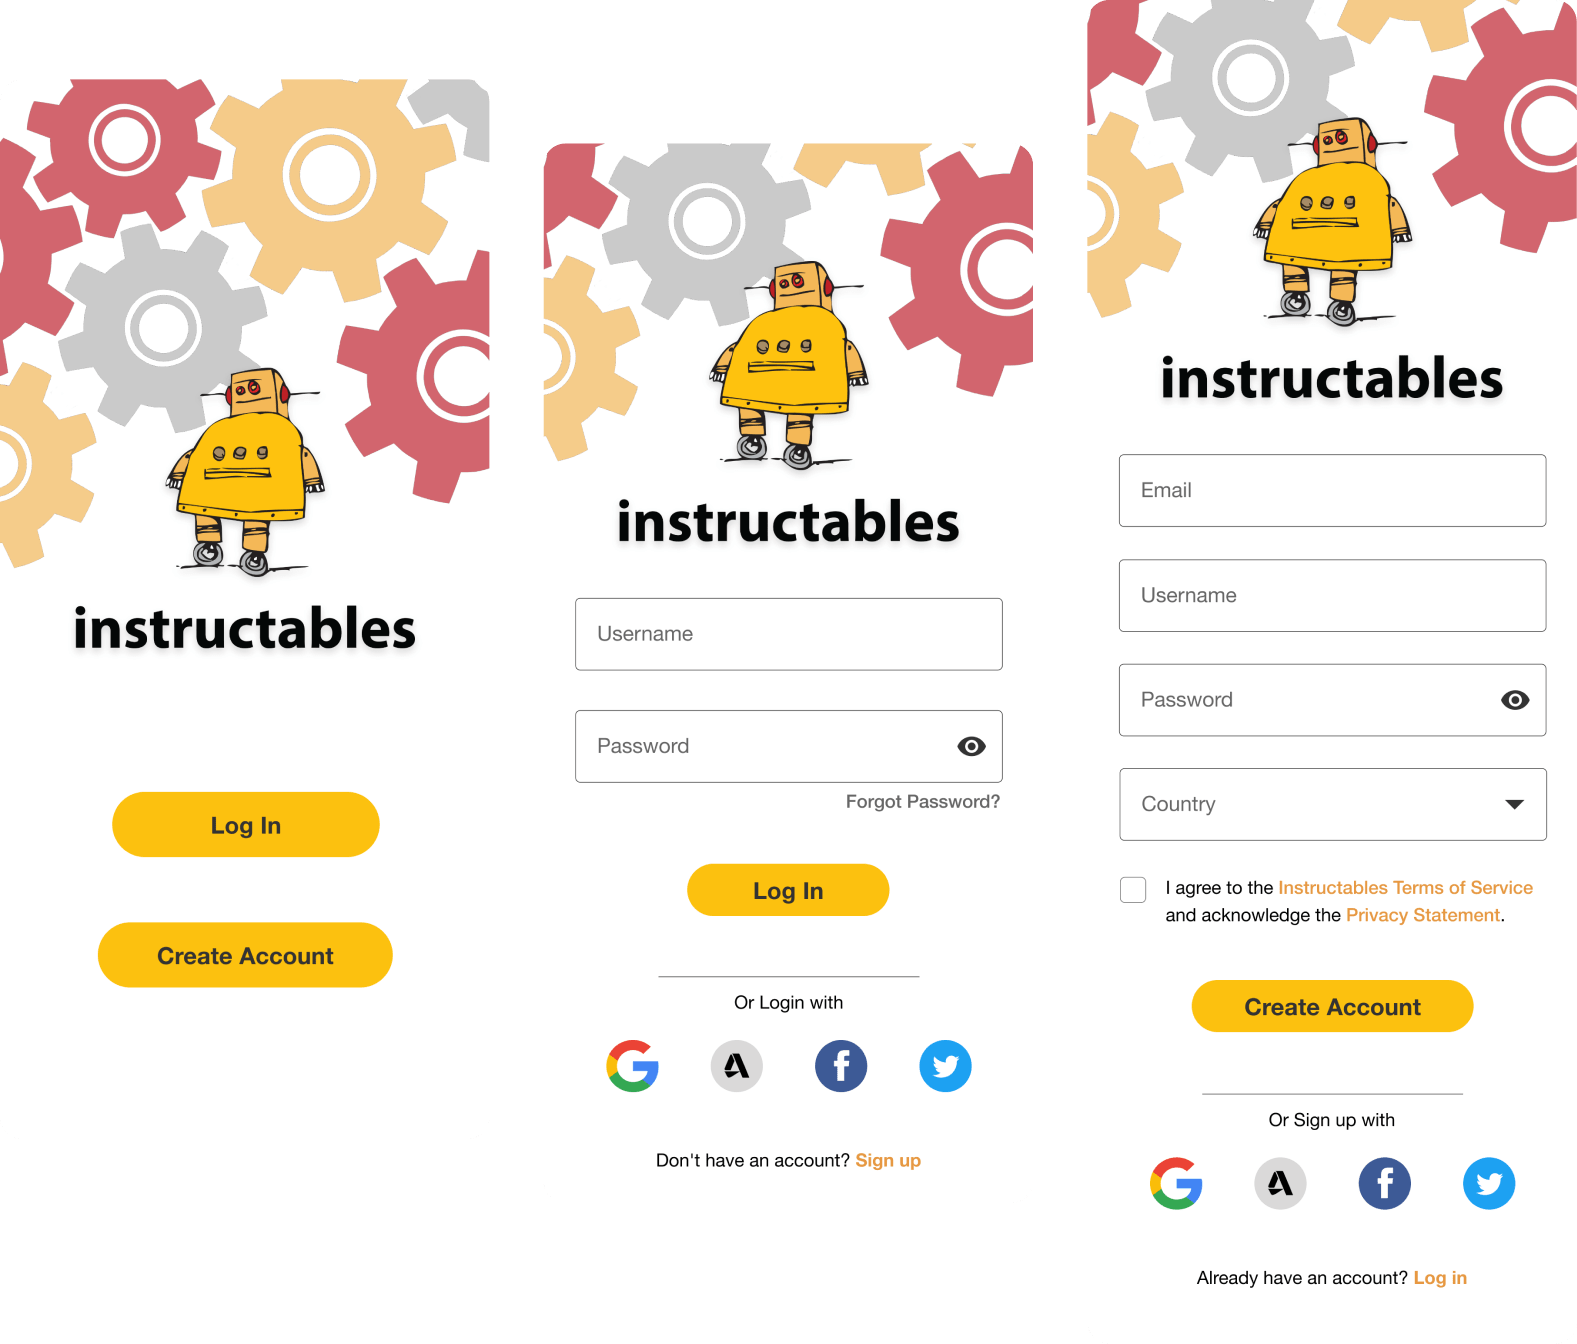 Instructables mockups: Initial view, Log In, Create Account